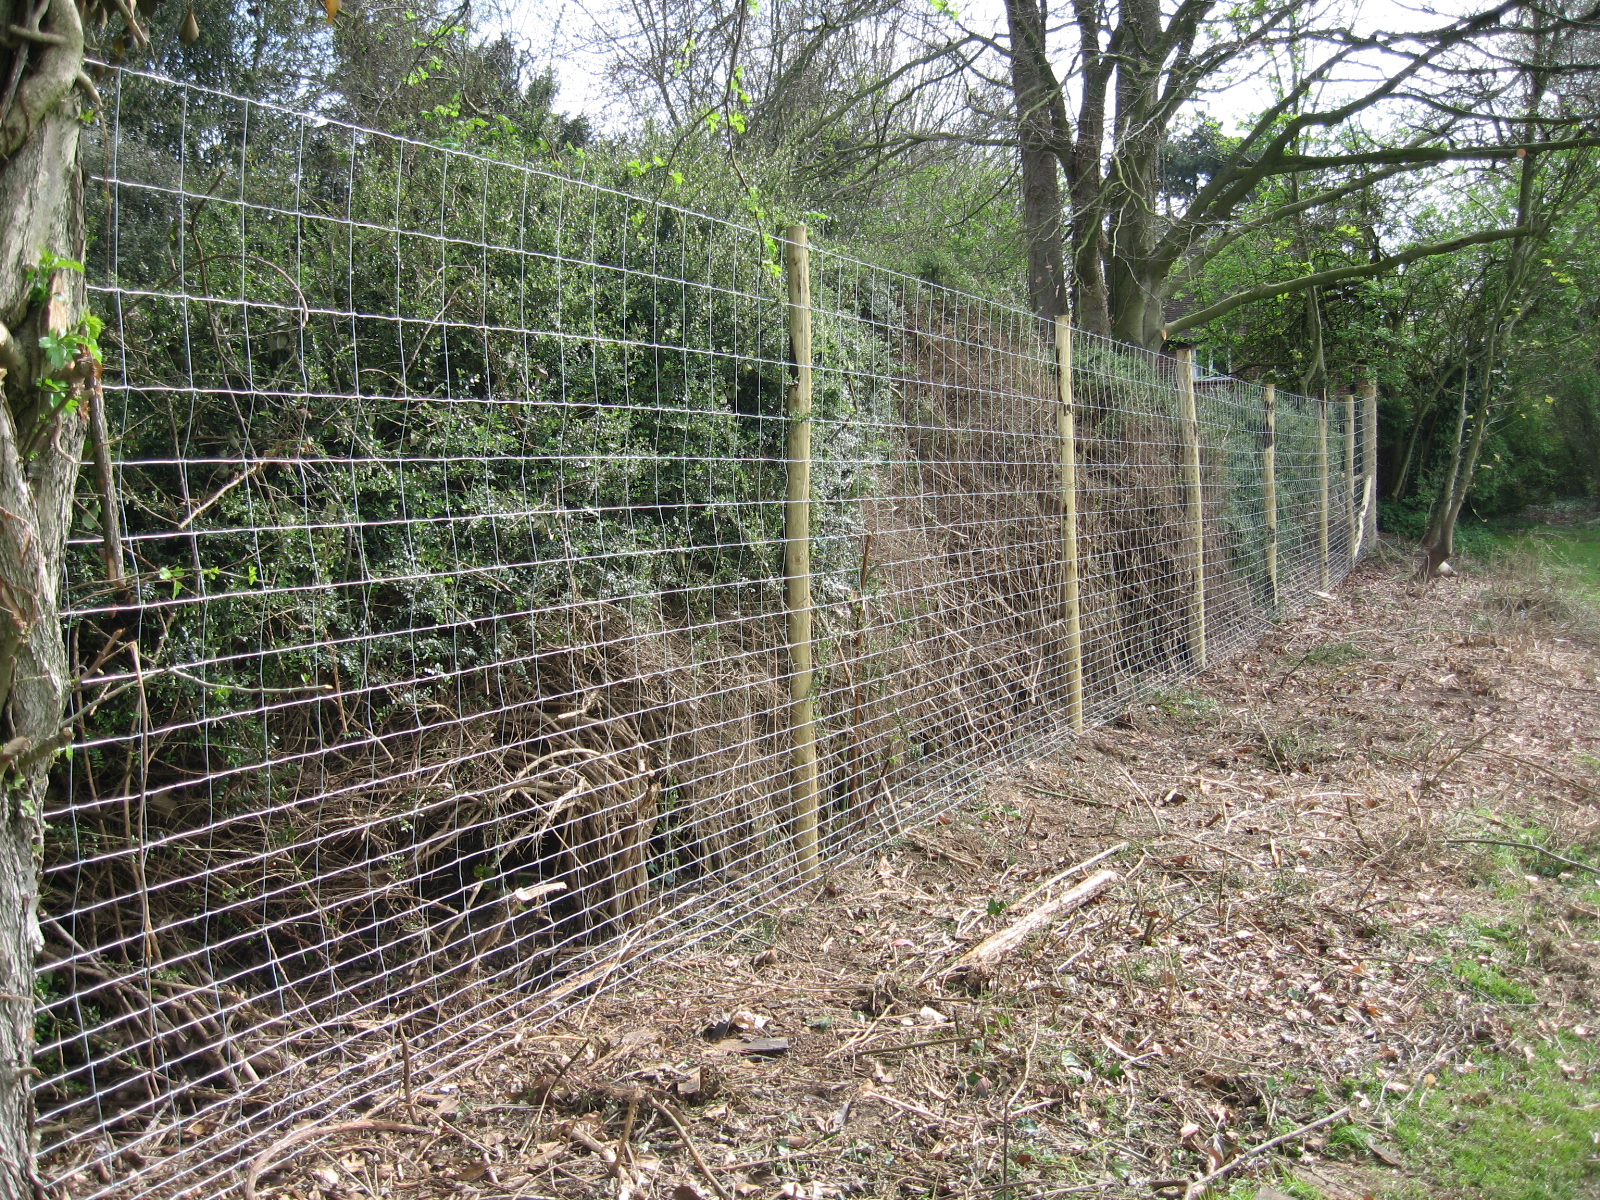 How to Install a Deer Fence to Keep Wildlife Out of the Garden 3